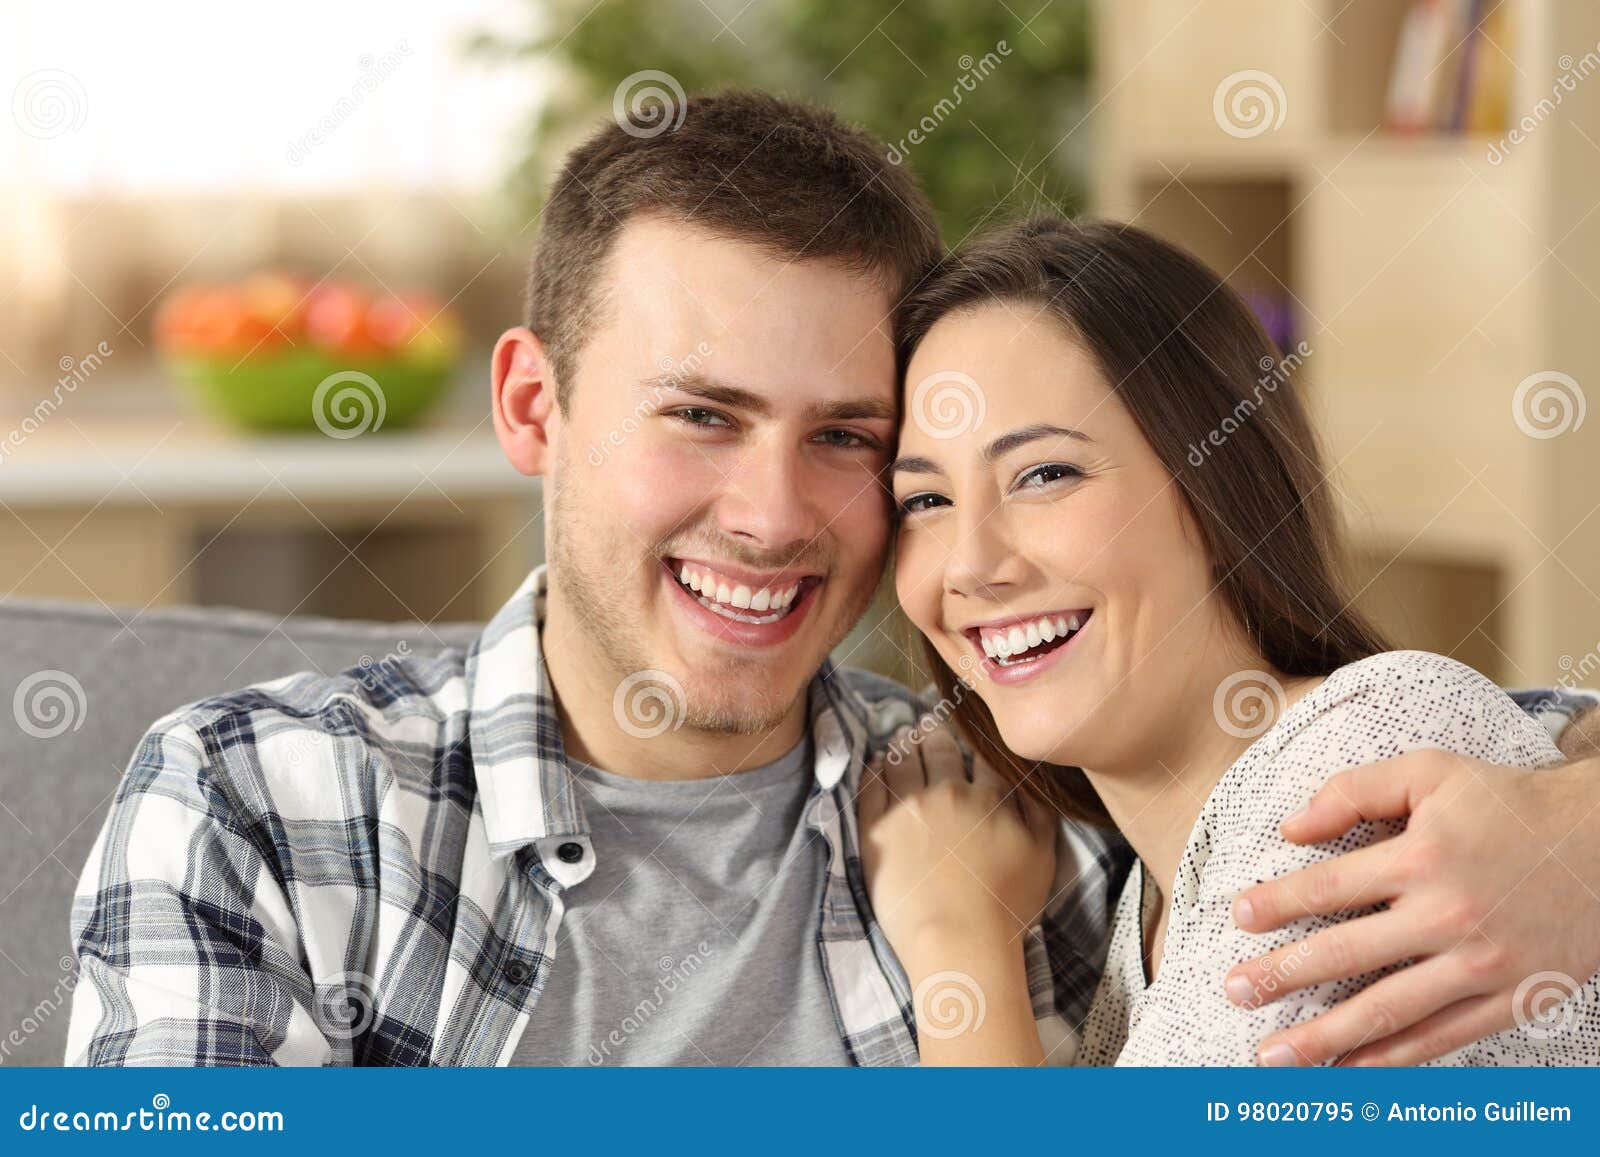 https://thumbs.dreamstime.com/z/happy-couple-perfect-teeth-looking-camera-sitting-couch-home-98020795.jpg